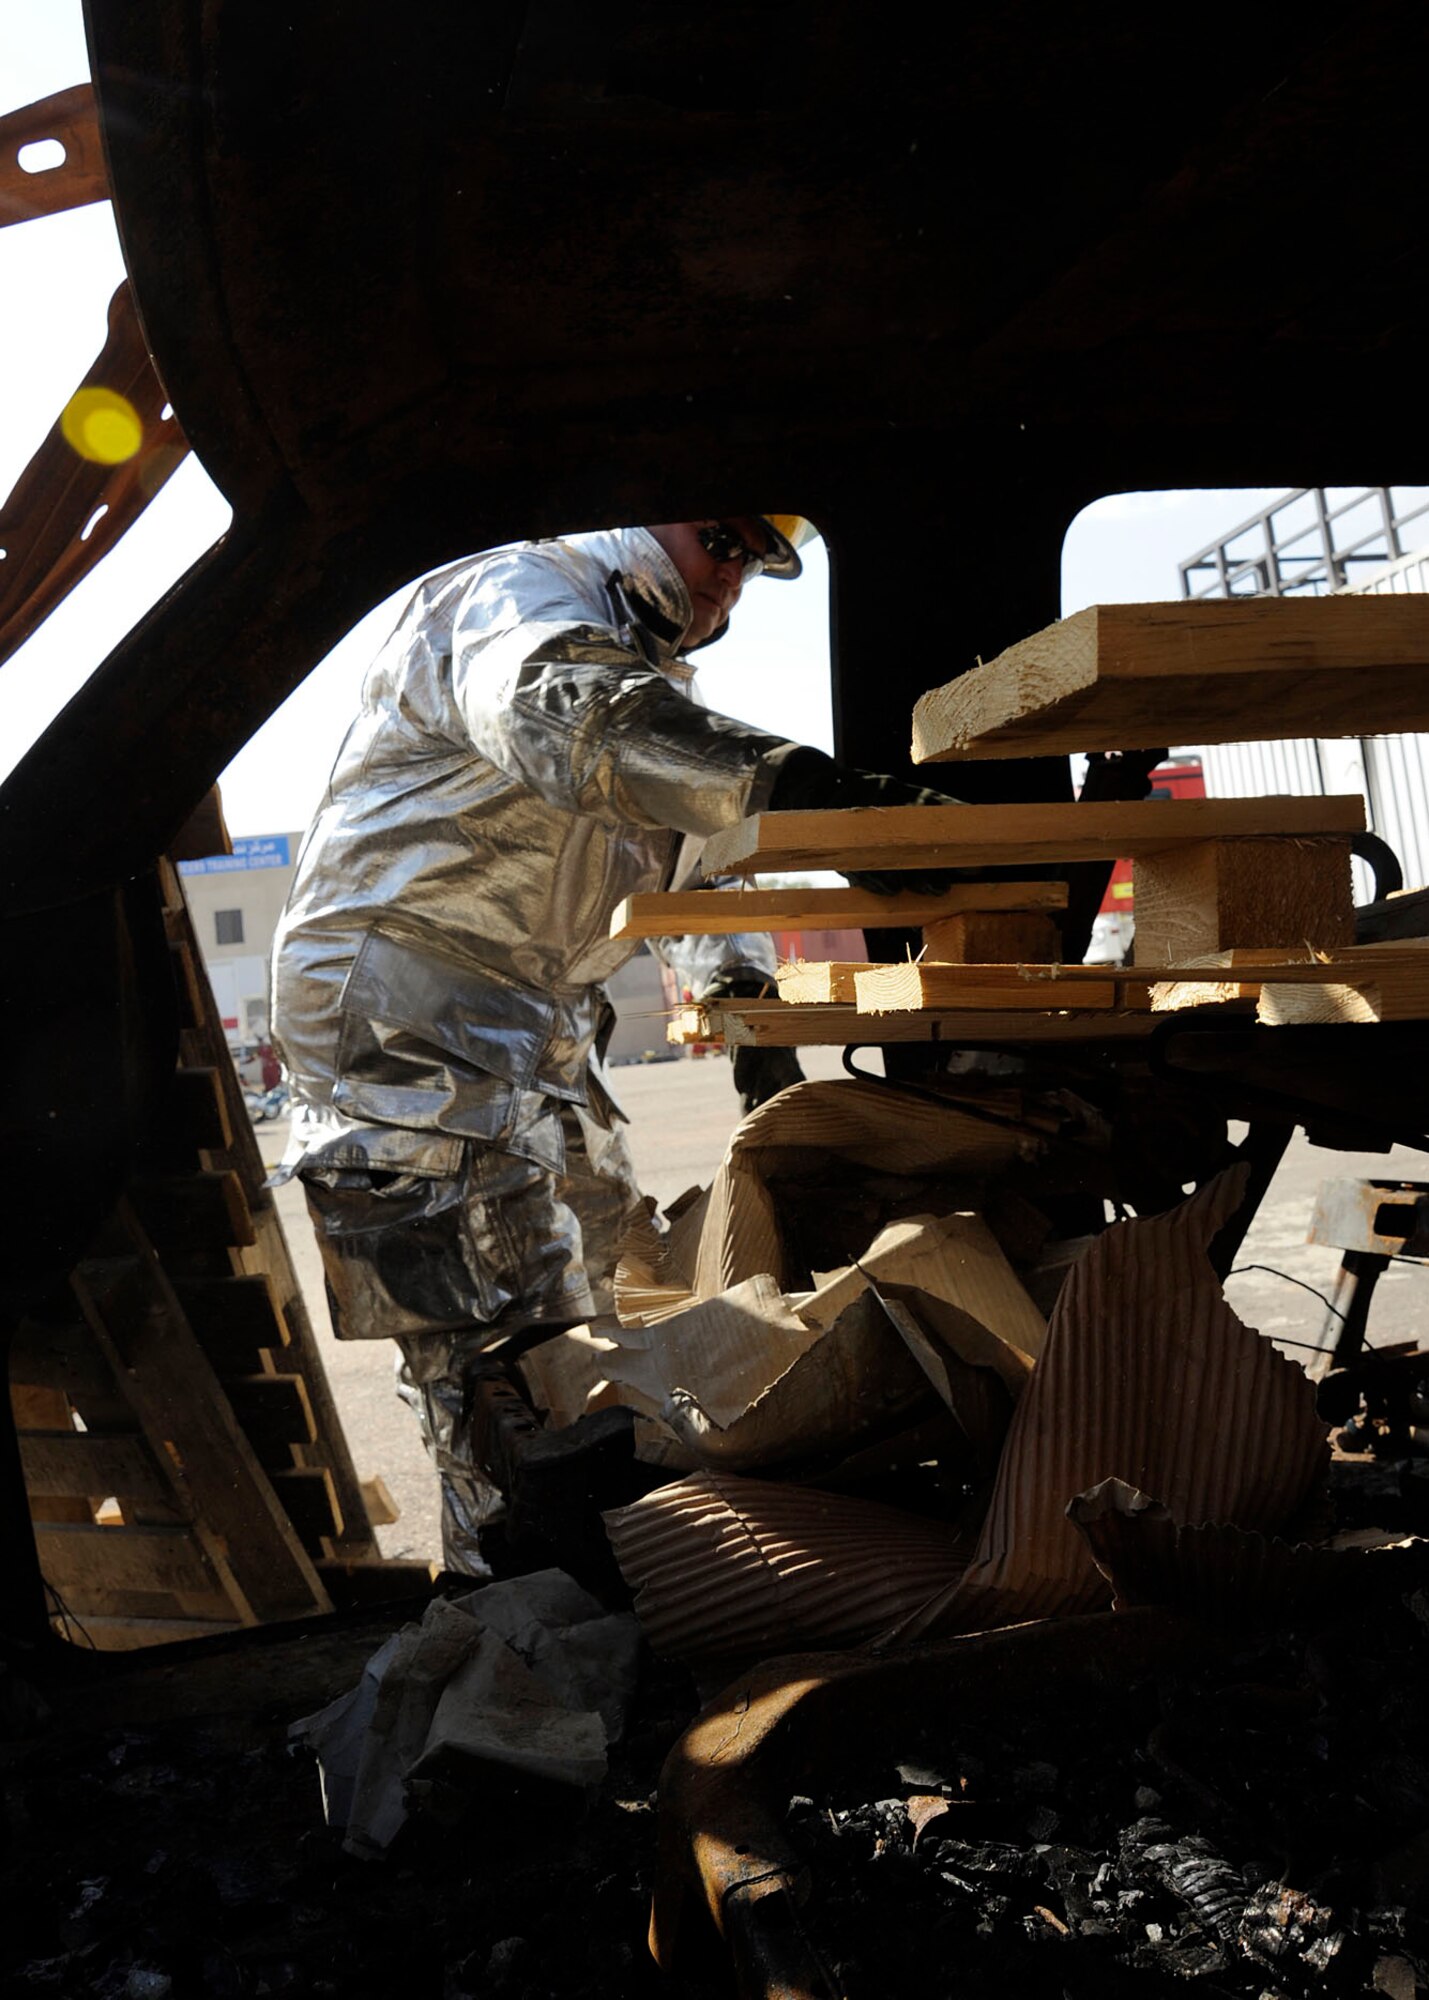 Tech. Sgt. Brian Partido, 821st Basic Technical Training Squadron, Coalition Air Force Transition Team fire rescue advisor, prepares for a scenario by loading pallets in a car as burning material for the Basic Fire Course in Baghdad, Iraq April 11, 2009. Sergeant Partido is making a live burn exercise for the students of the Iraqi Joint Fire Academy. Twenty-six students of the Iraqi air force and the Iraqi civil defense applied what they learned in the classroom. Sergeant Partido is deployed from the 19th Civil Engineer Squadron at Little Rock Air Force Base, Ark., and is a native of El Paso, Texas.  (U.S. Air Force photo by Senior Airman Jacqueline Romero)